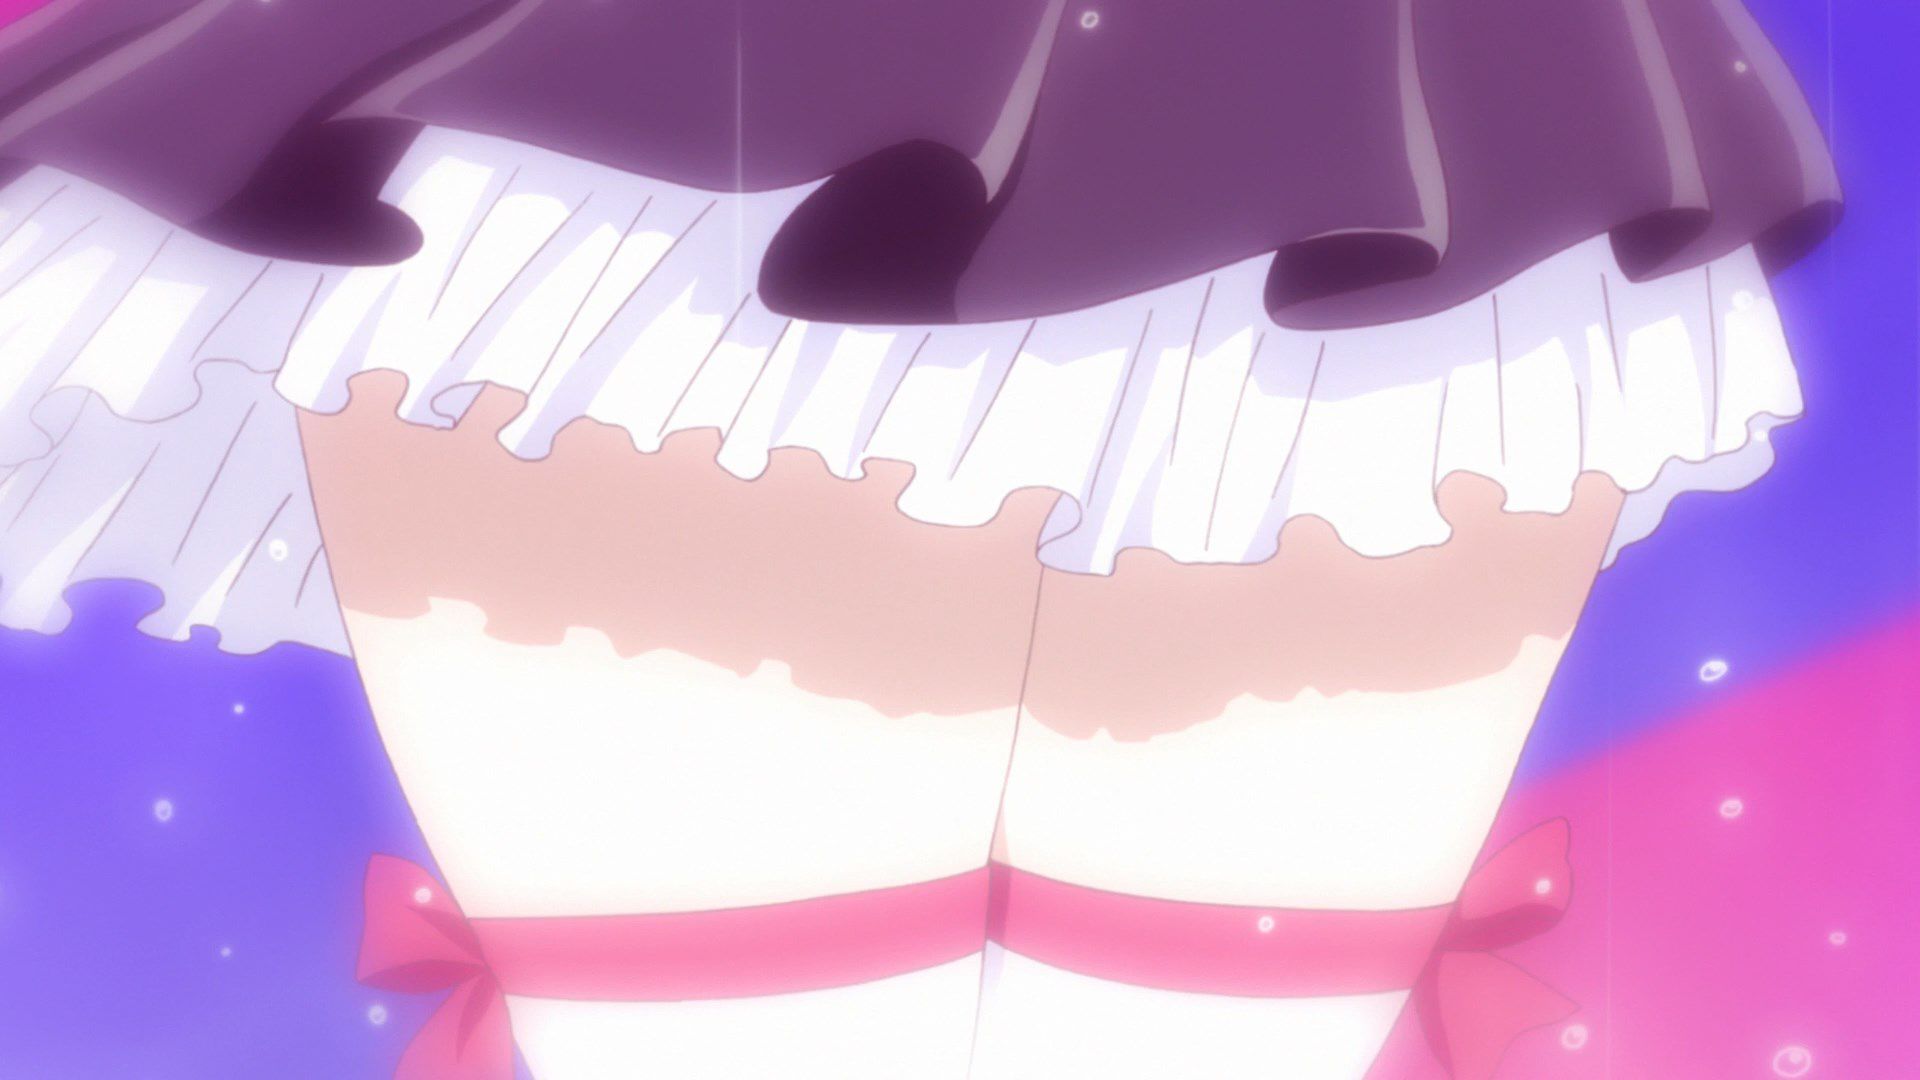 [God images] "love live! ' Μm ' PV's leg is too erotic everyone wakes up to a leg fetish of wwwww 46